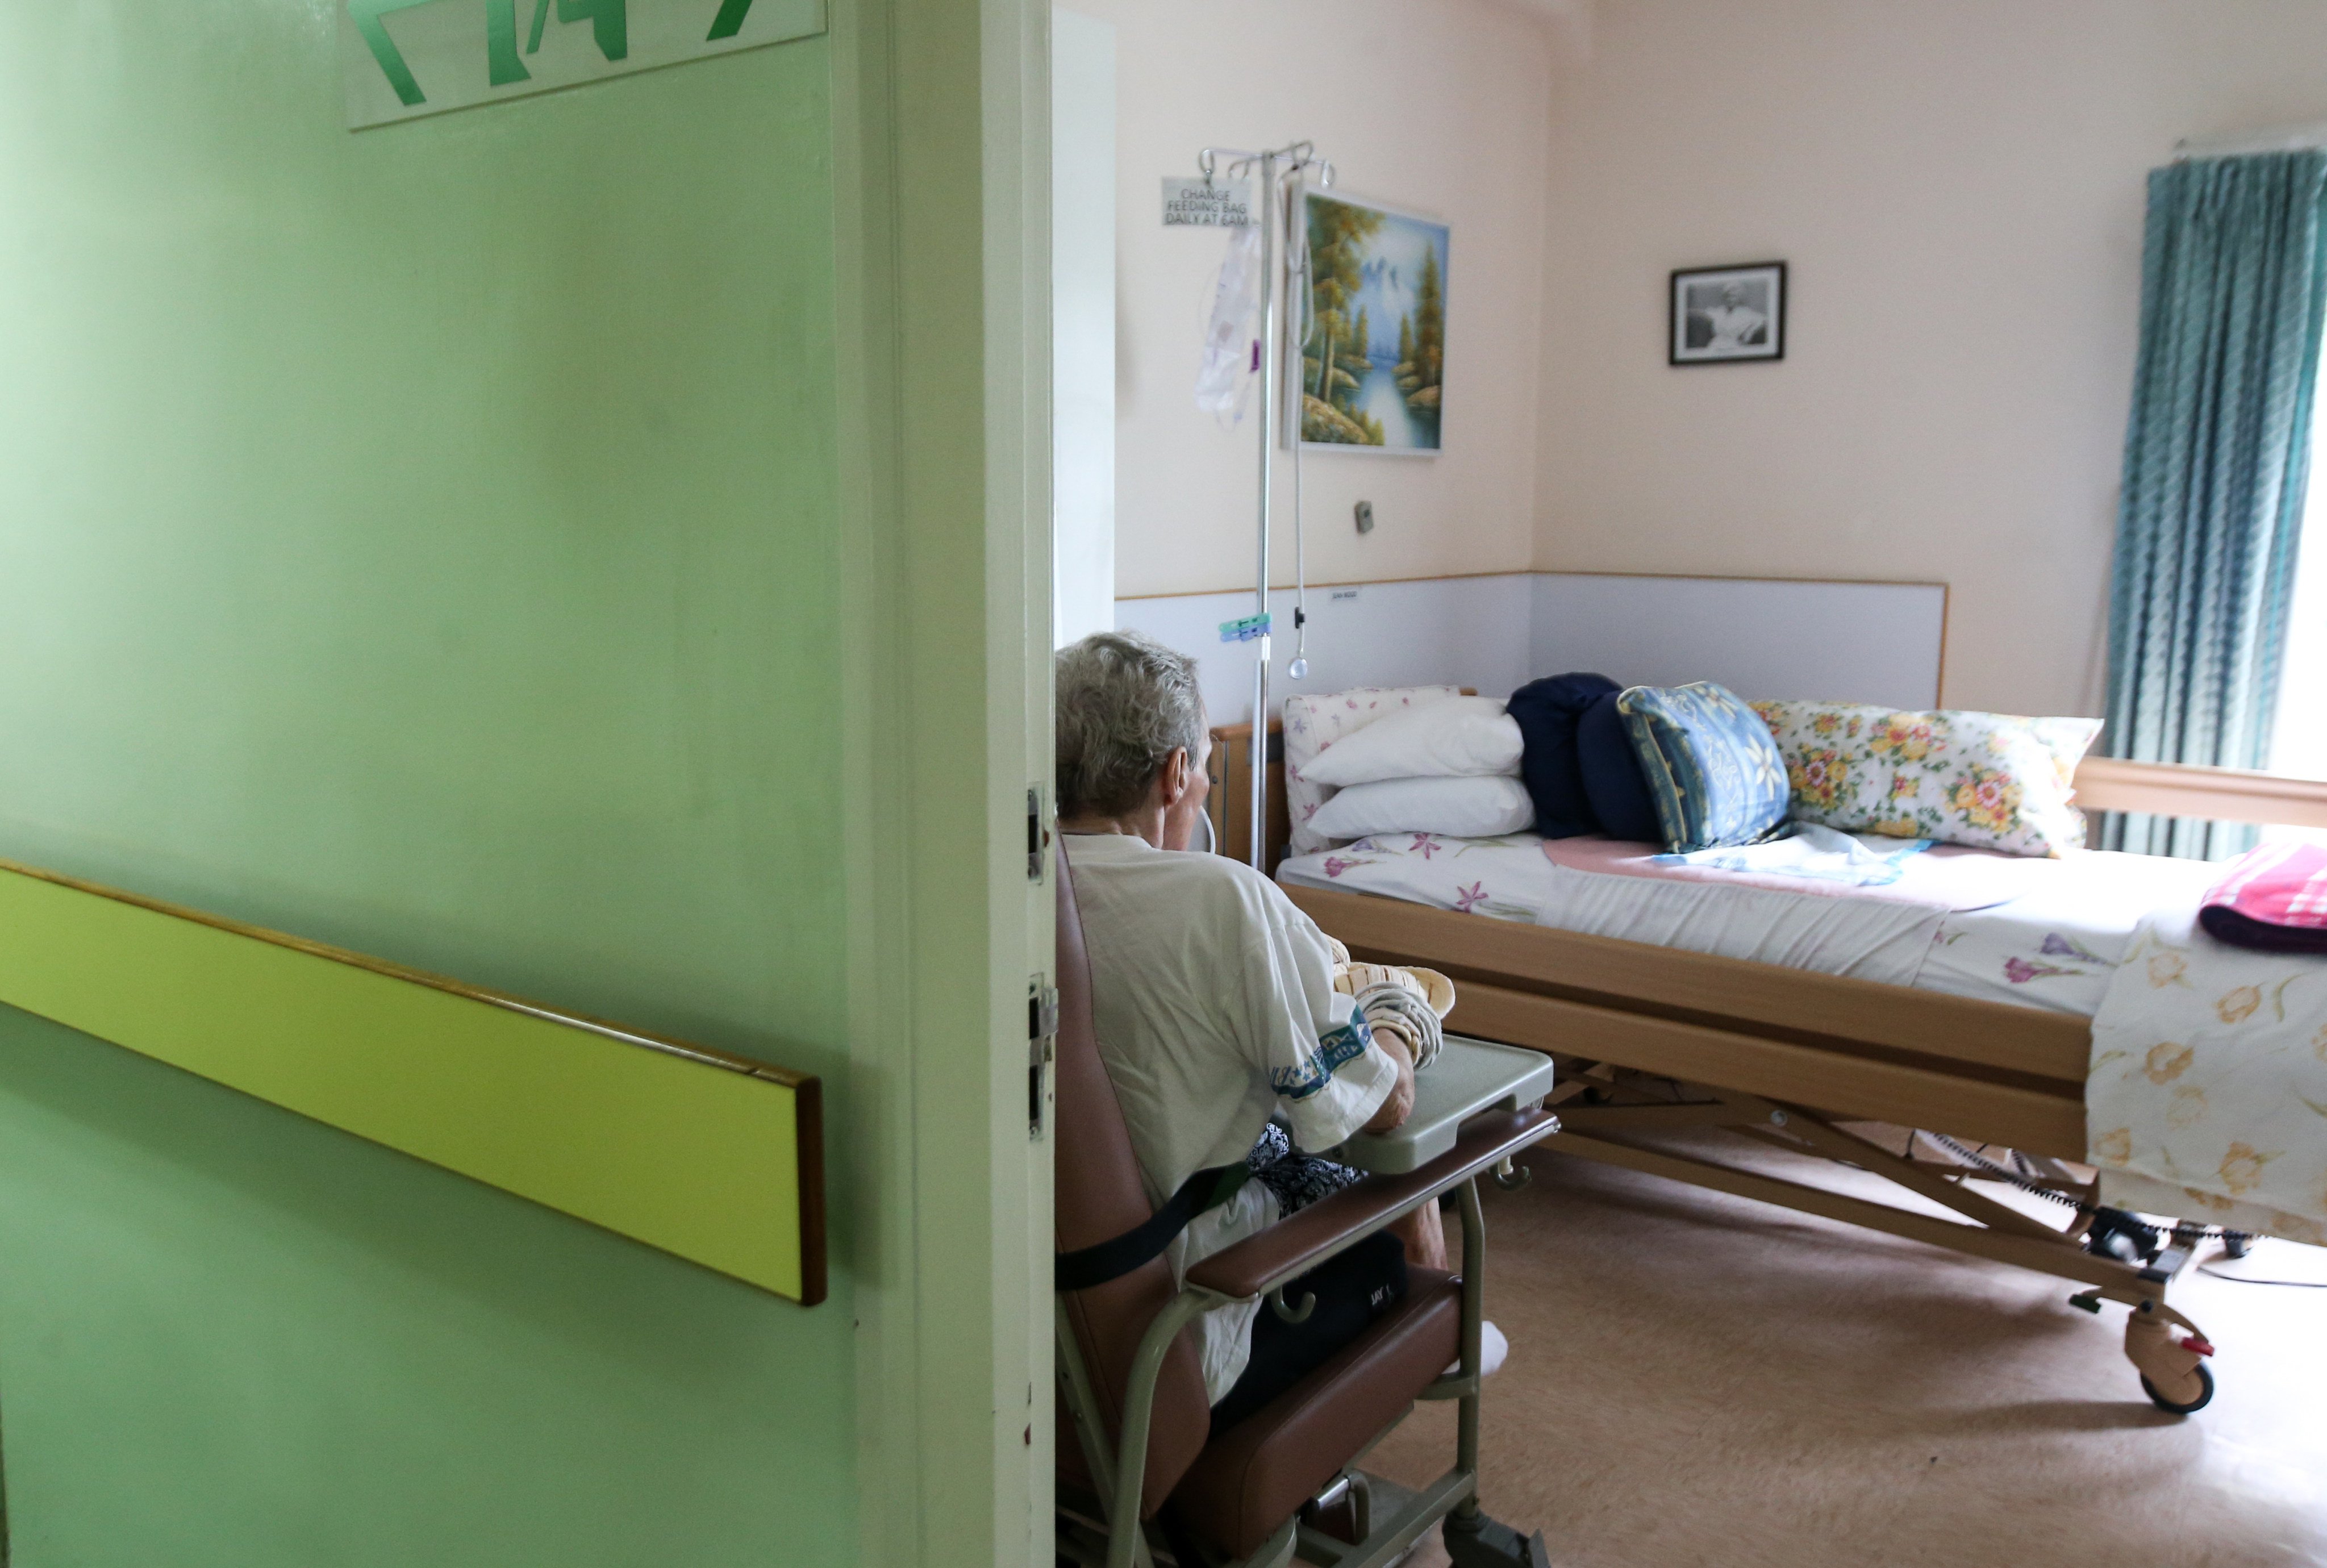 The Hong Kong government has a policy goal to provide support for carers in the city. Photo: David Wong